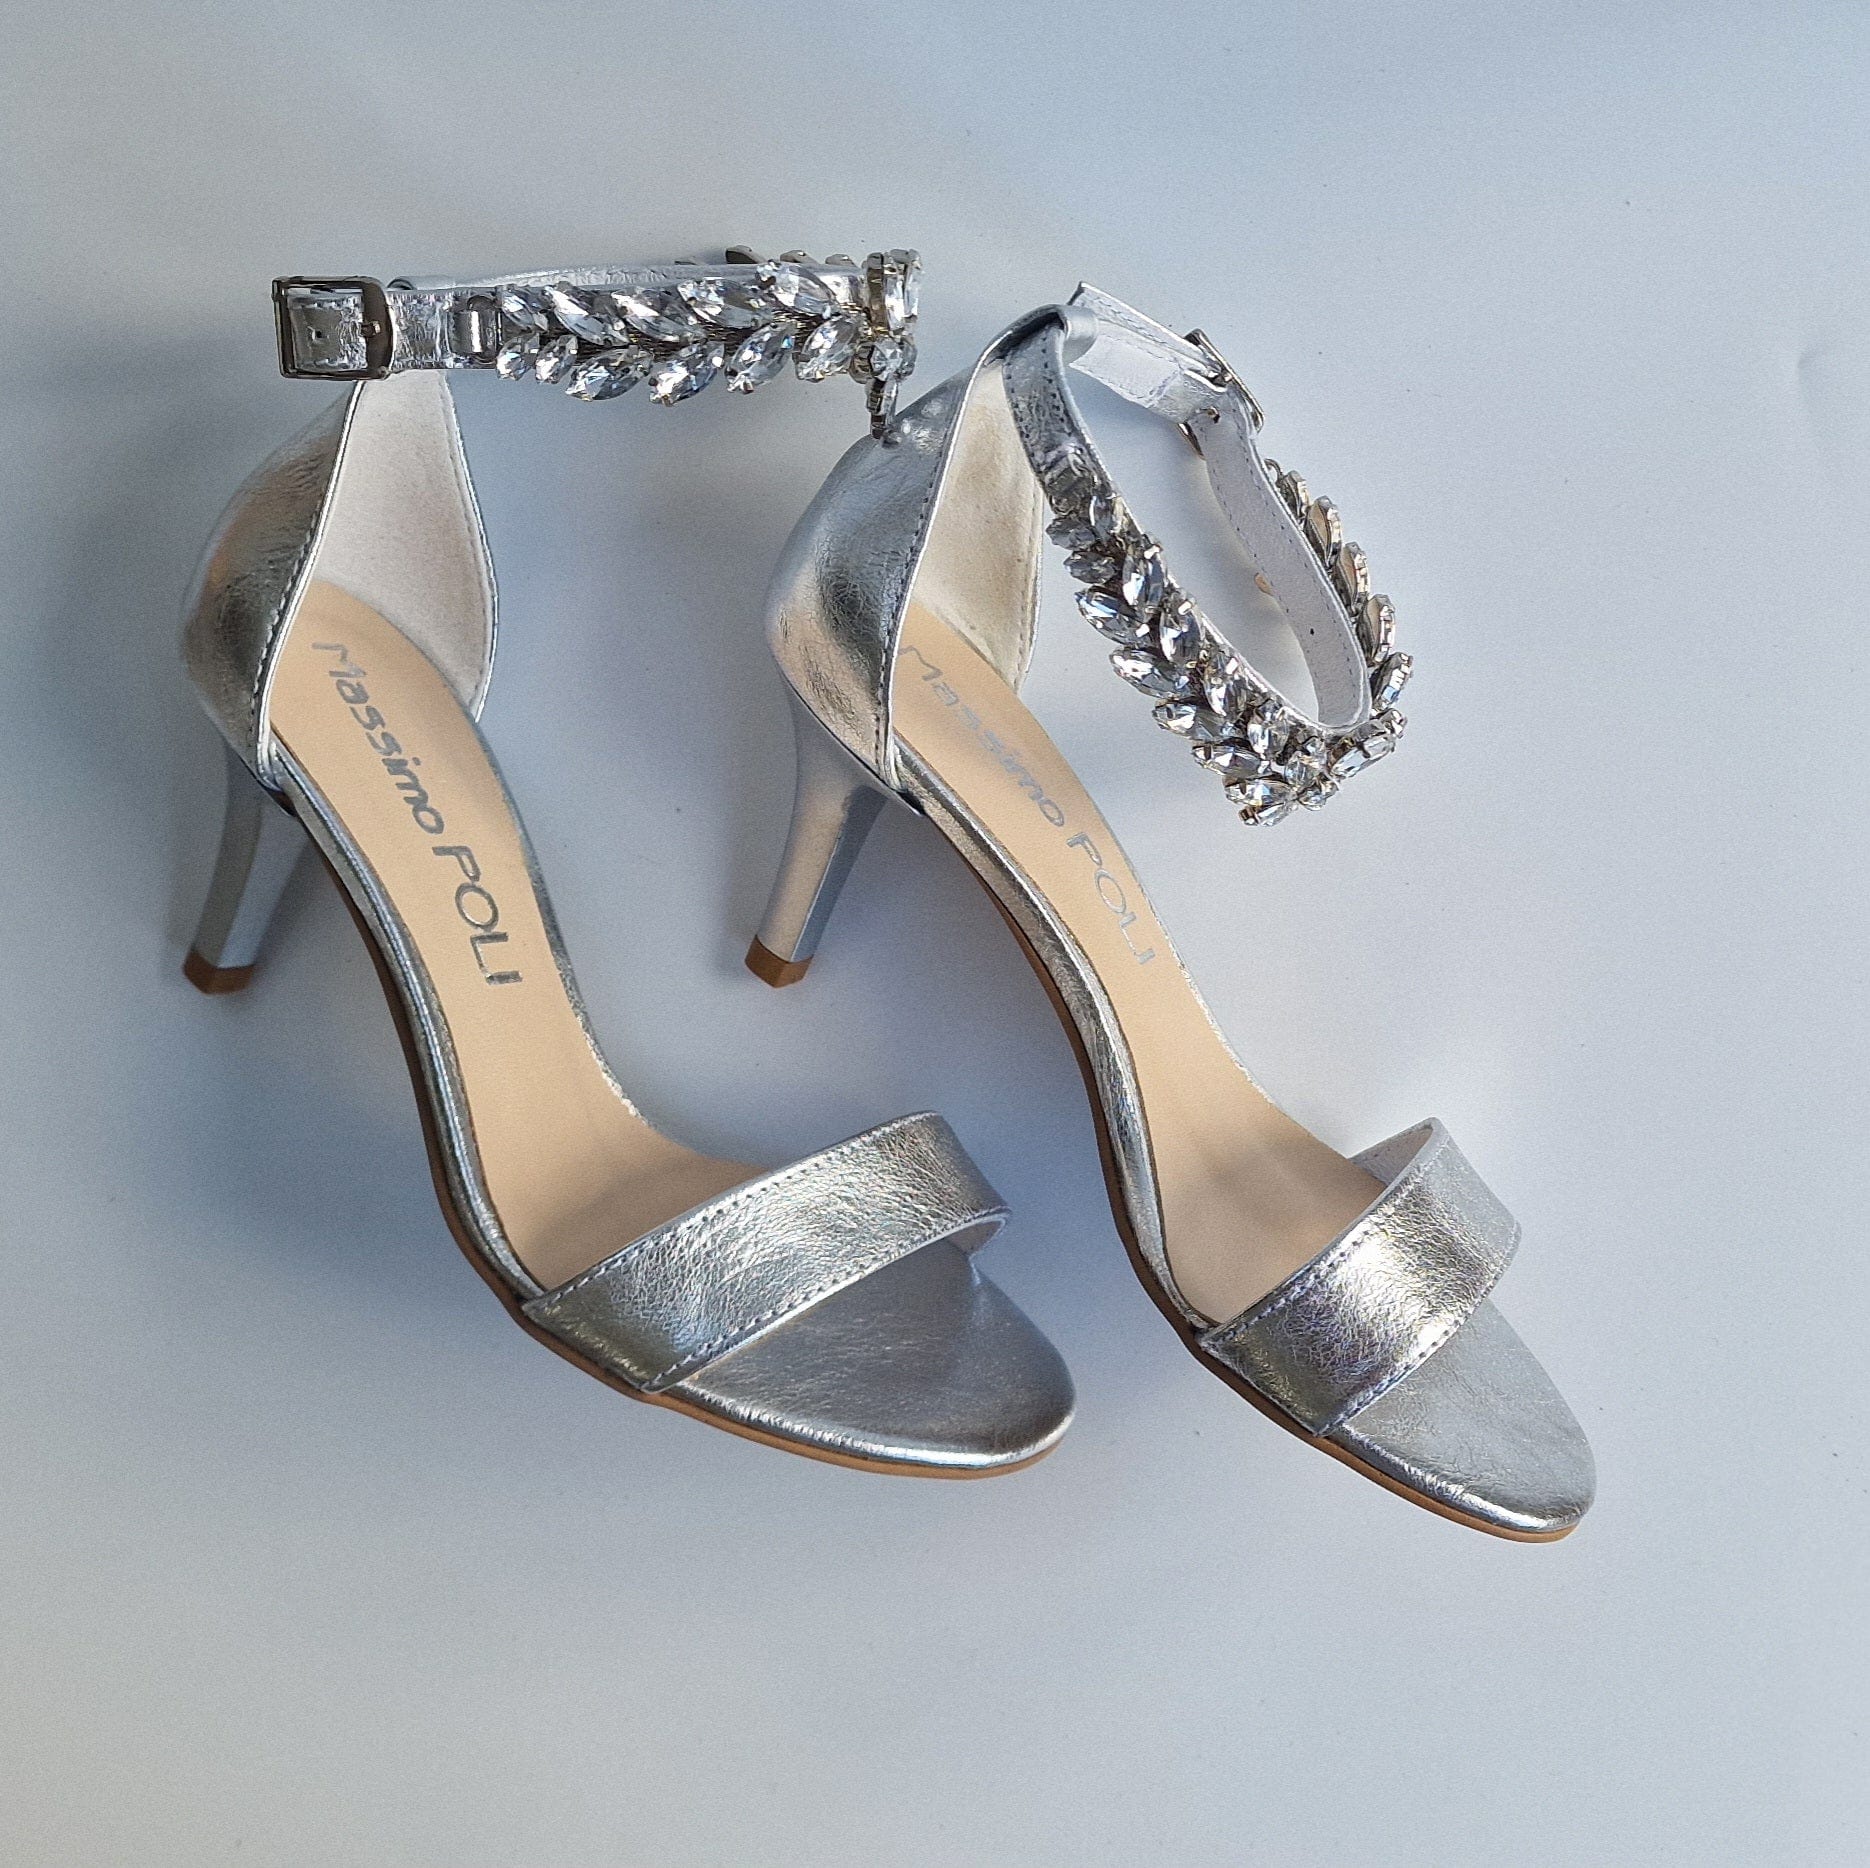 Wedding sandals in silver leather with diamanté ankle strap